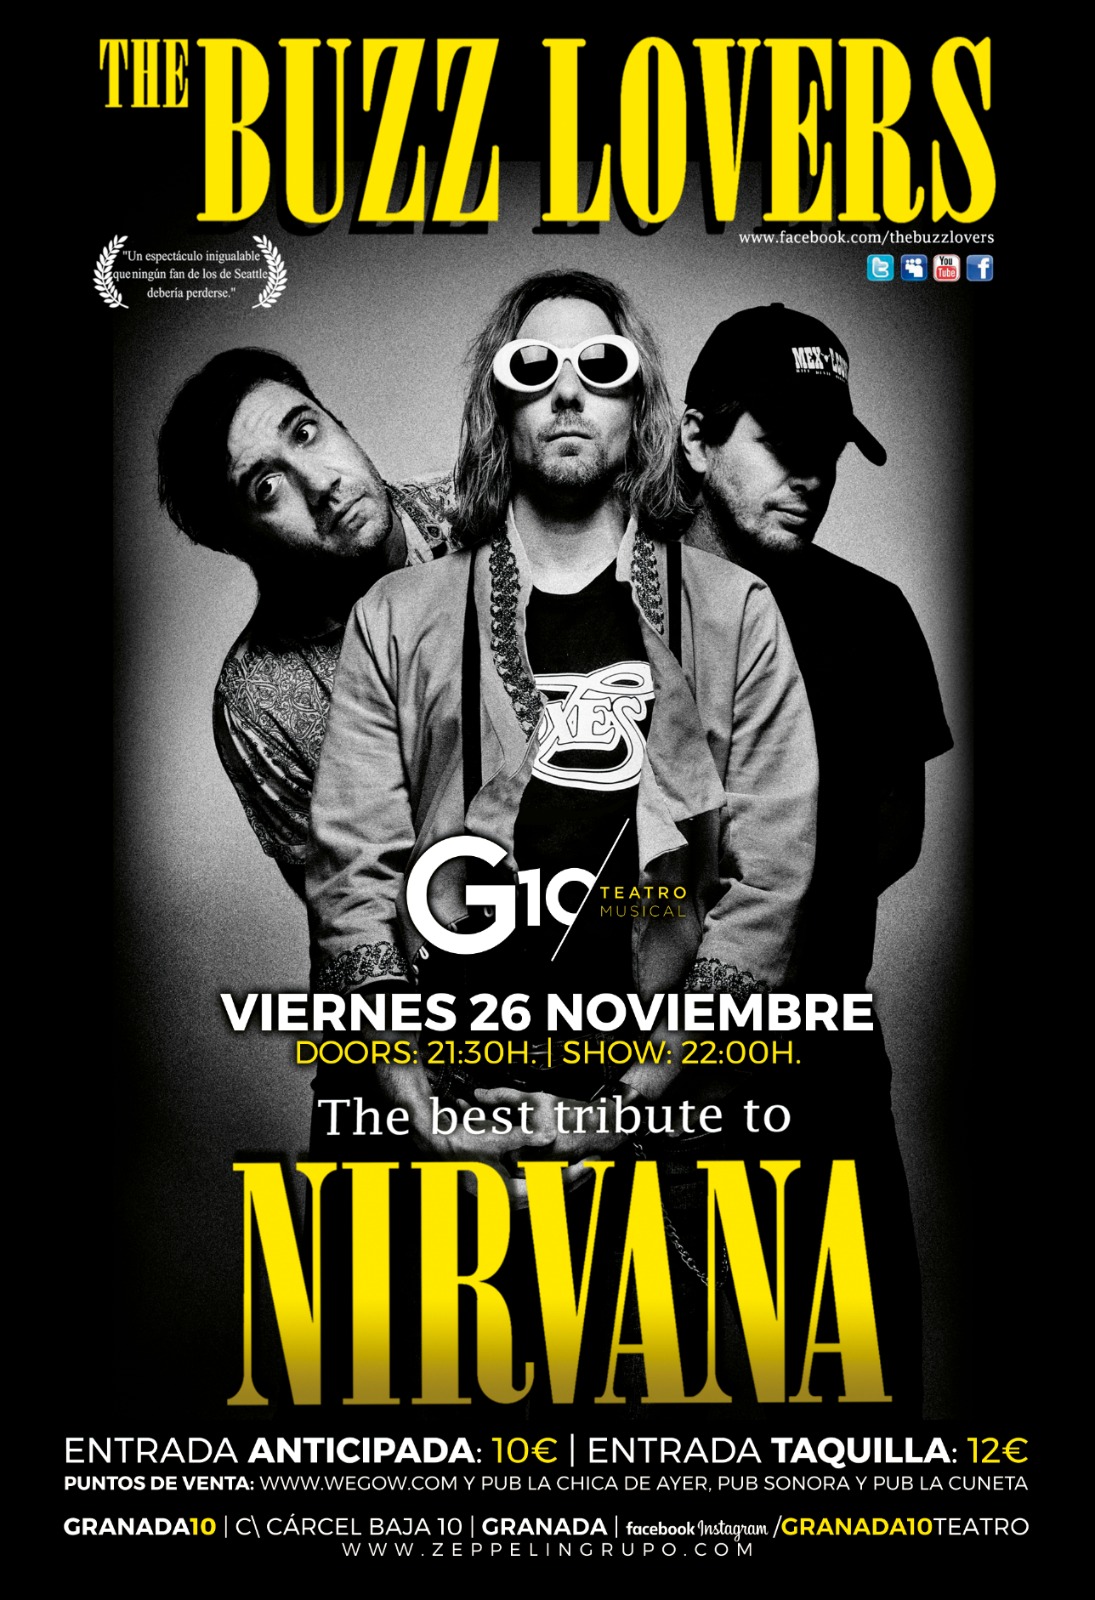 tributo a nirvana the buzz lovers 16345751791753755